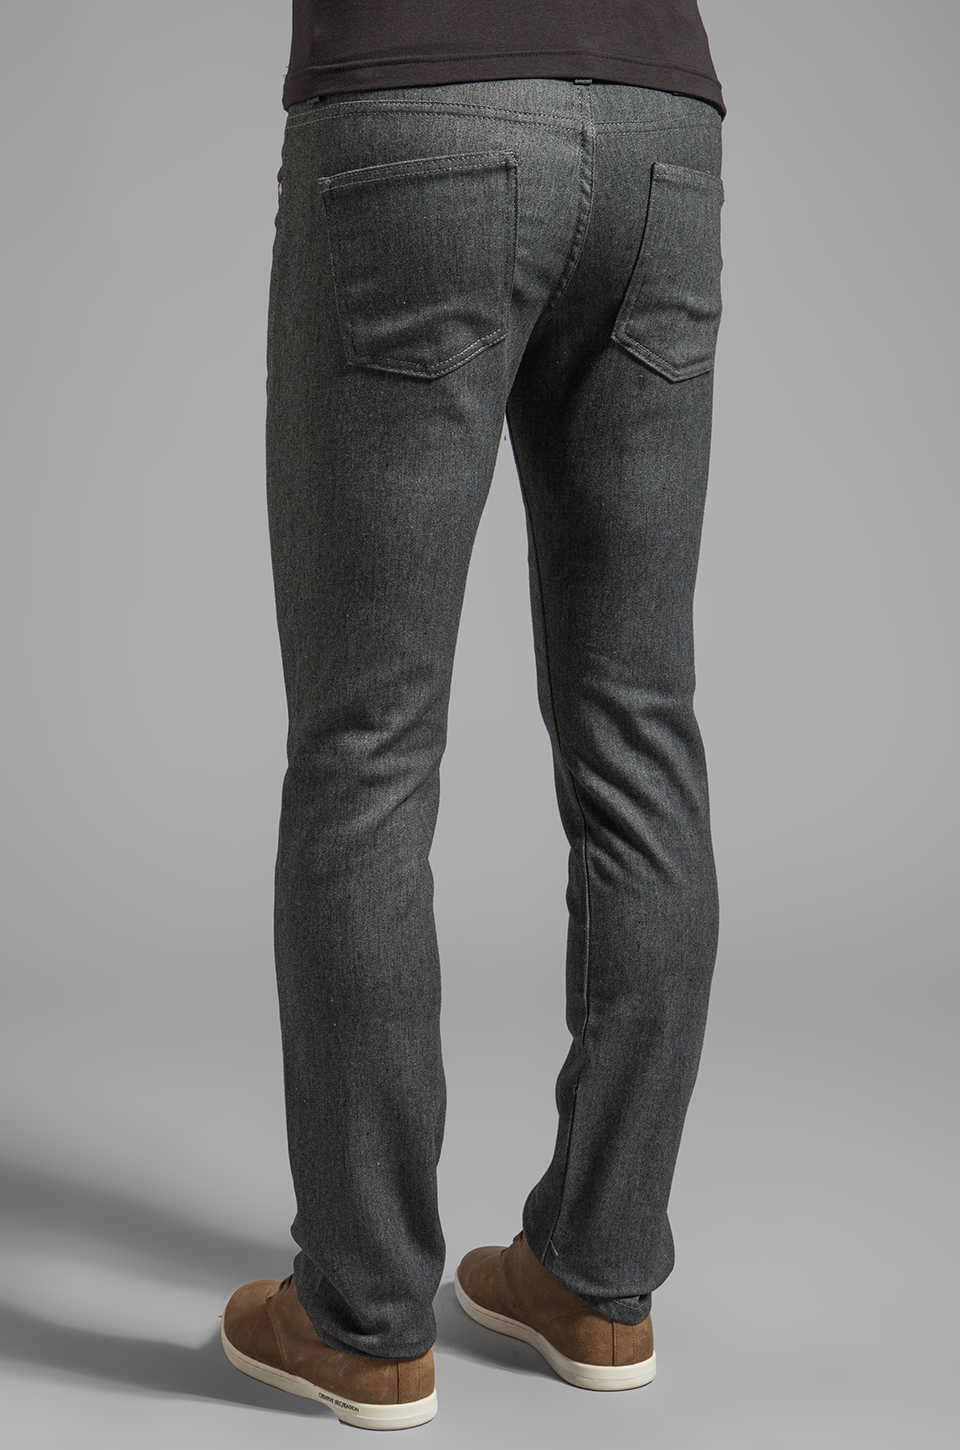 Naked & Famous Denim weird Guy Slim Fit Jeans in Gray 